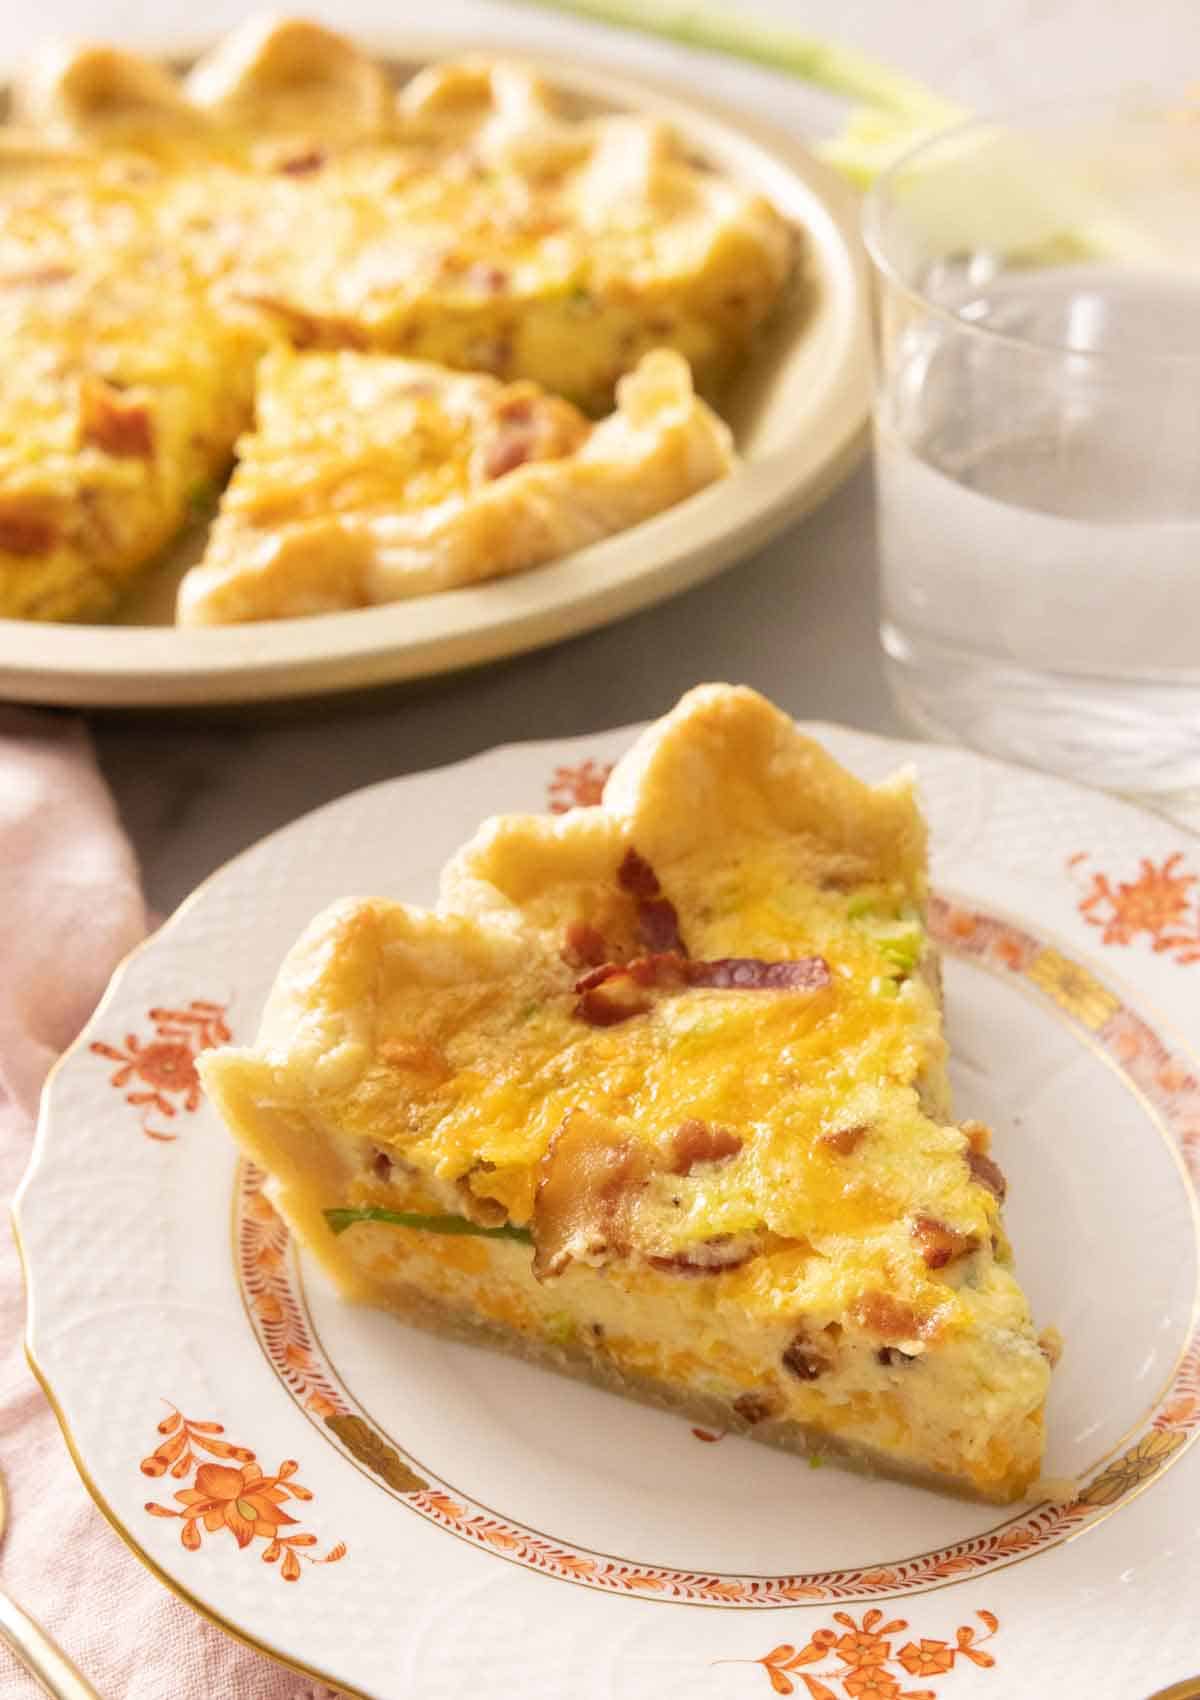 A slice of quiche on a plate in front of the rest of the pie.